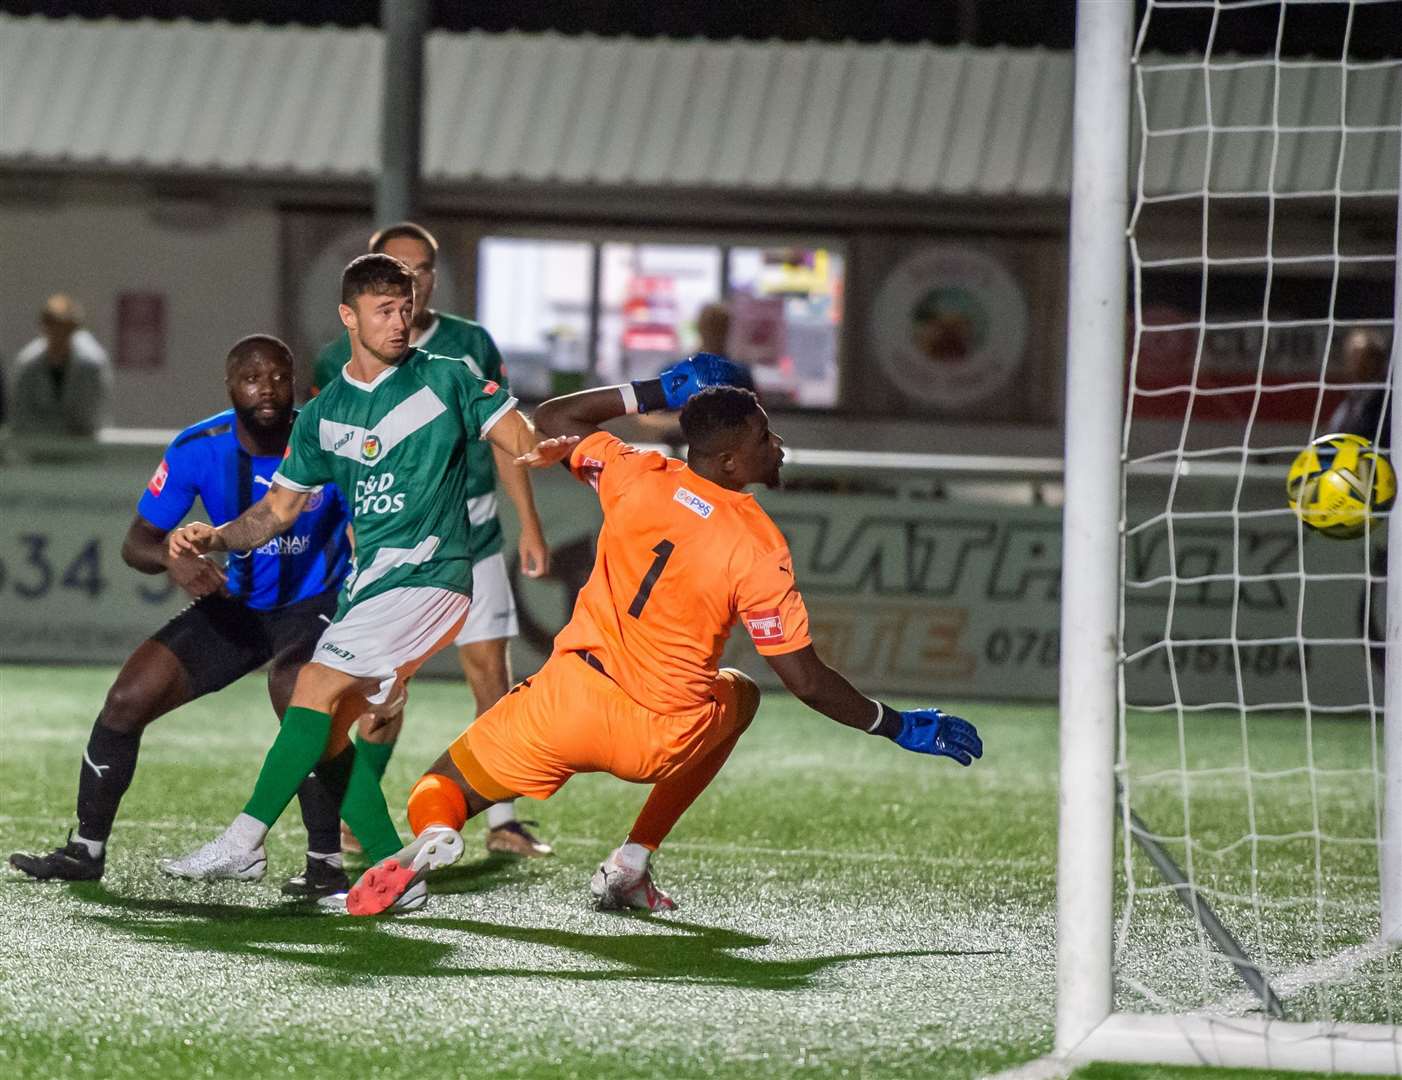 Danny Parish gives Ashford the lead against Sevenoaks on Tuesday night. Picture: Ian Scammell